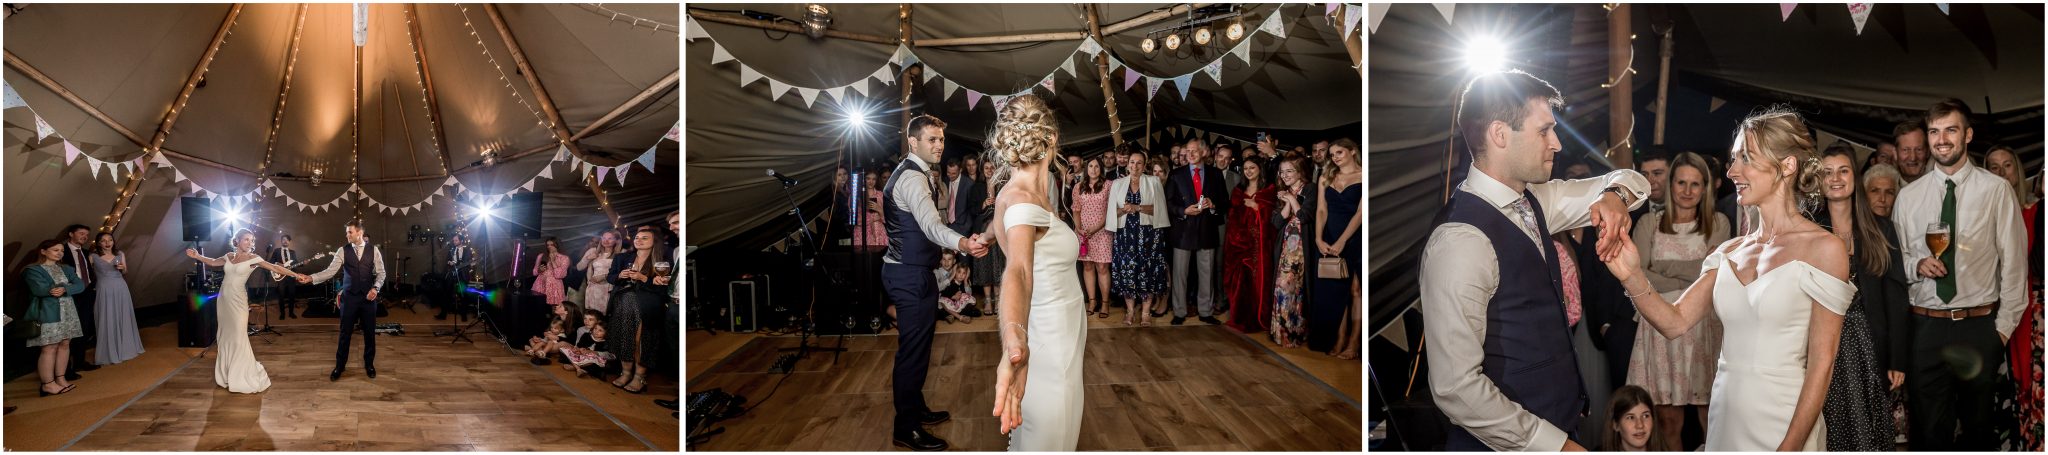 Firdst dance weding photography in marquee text at the Holywell Estate in Hampshire